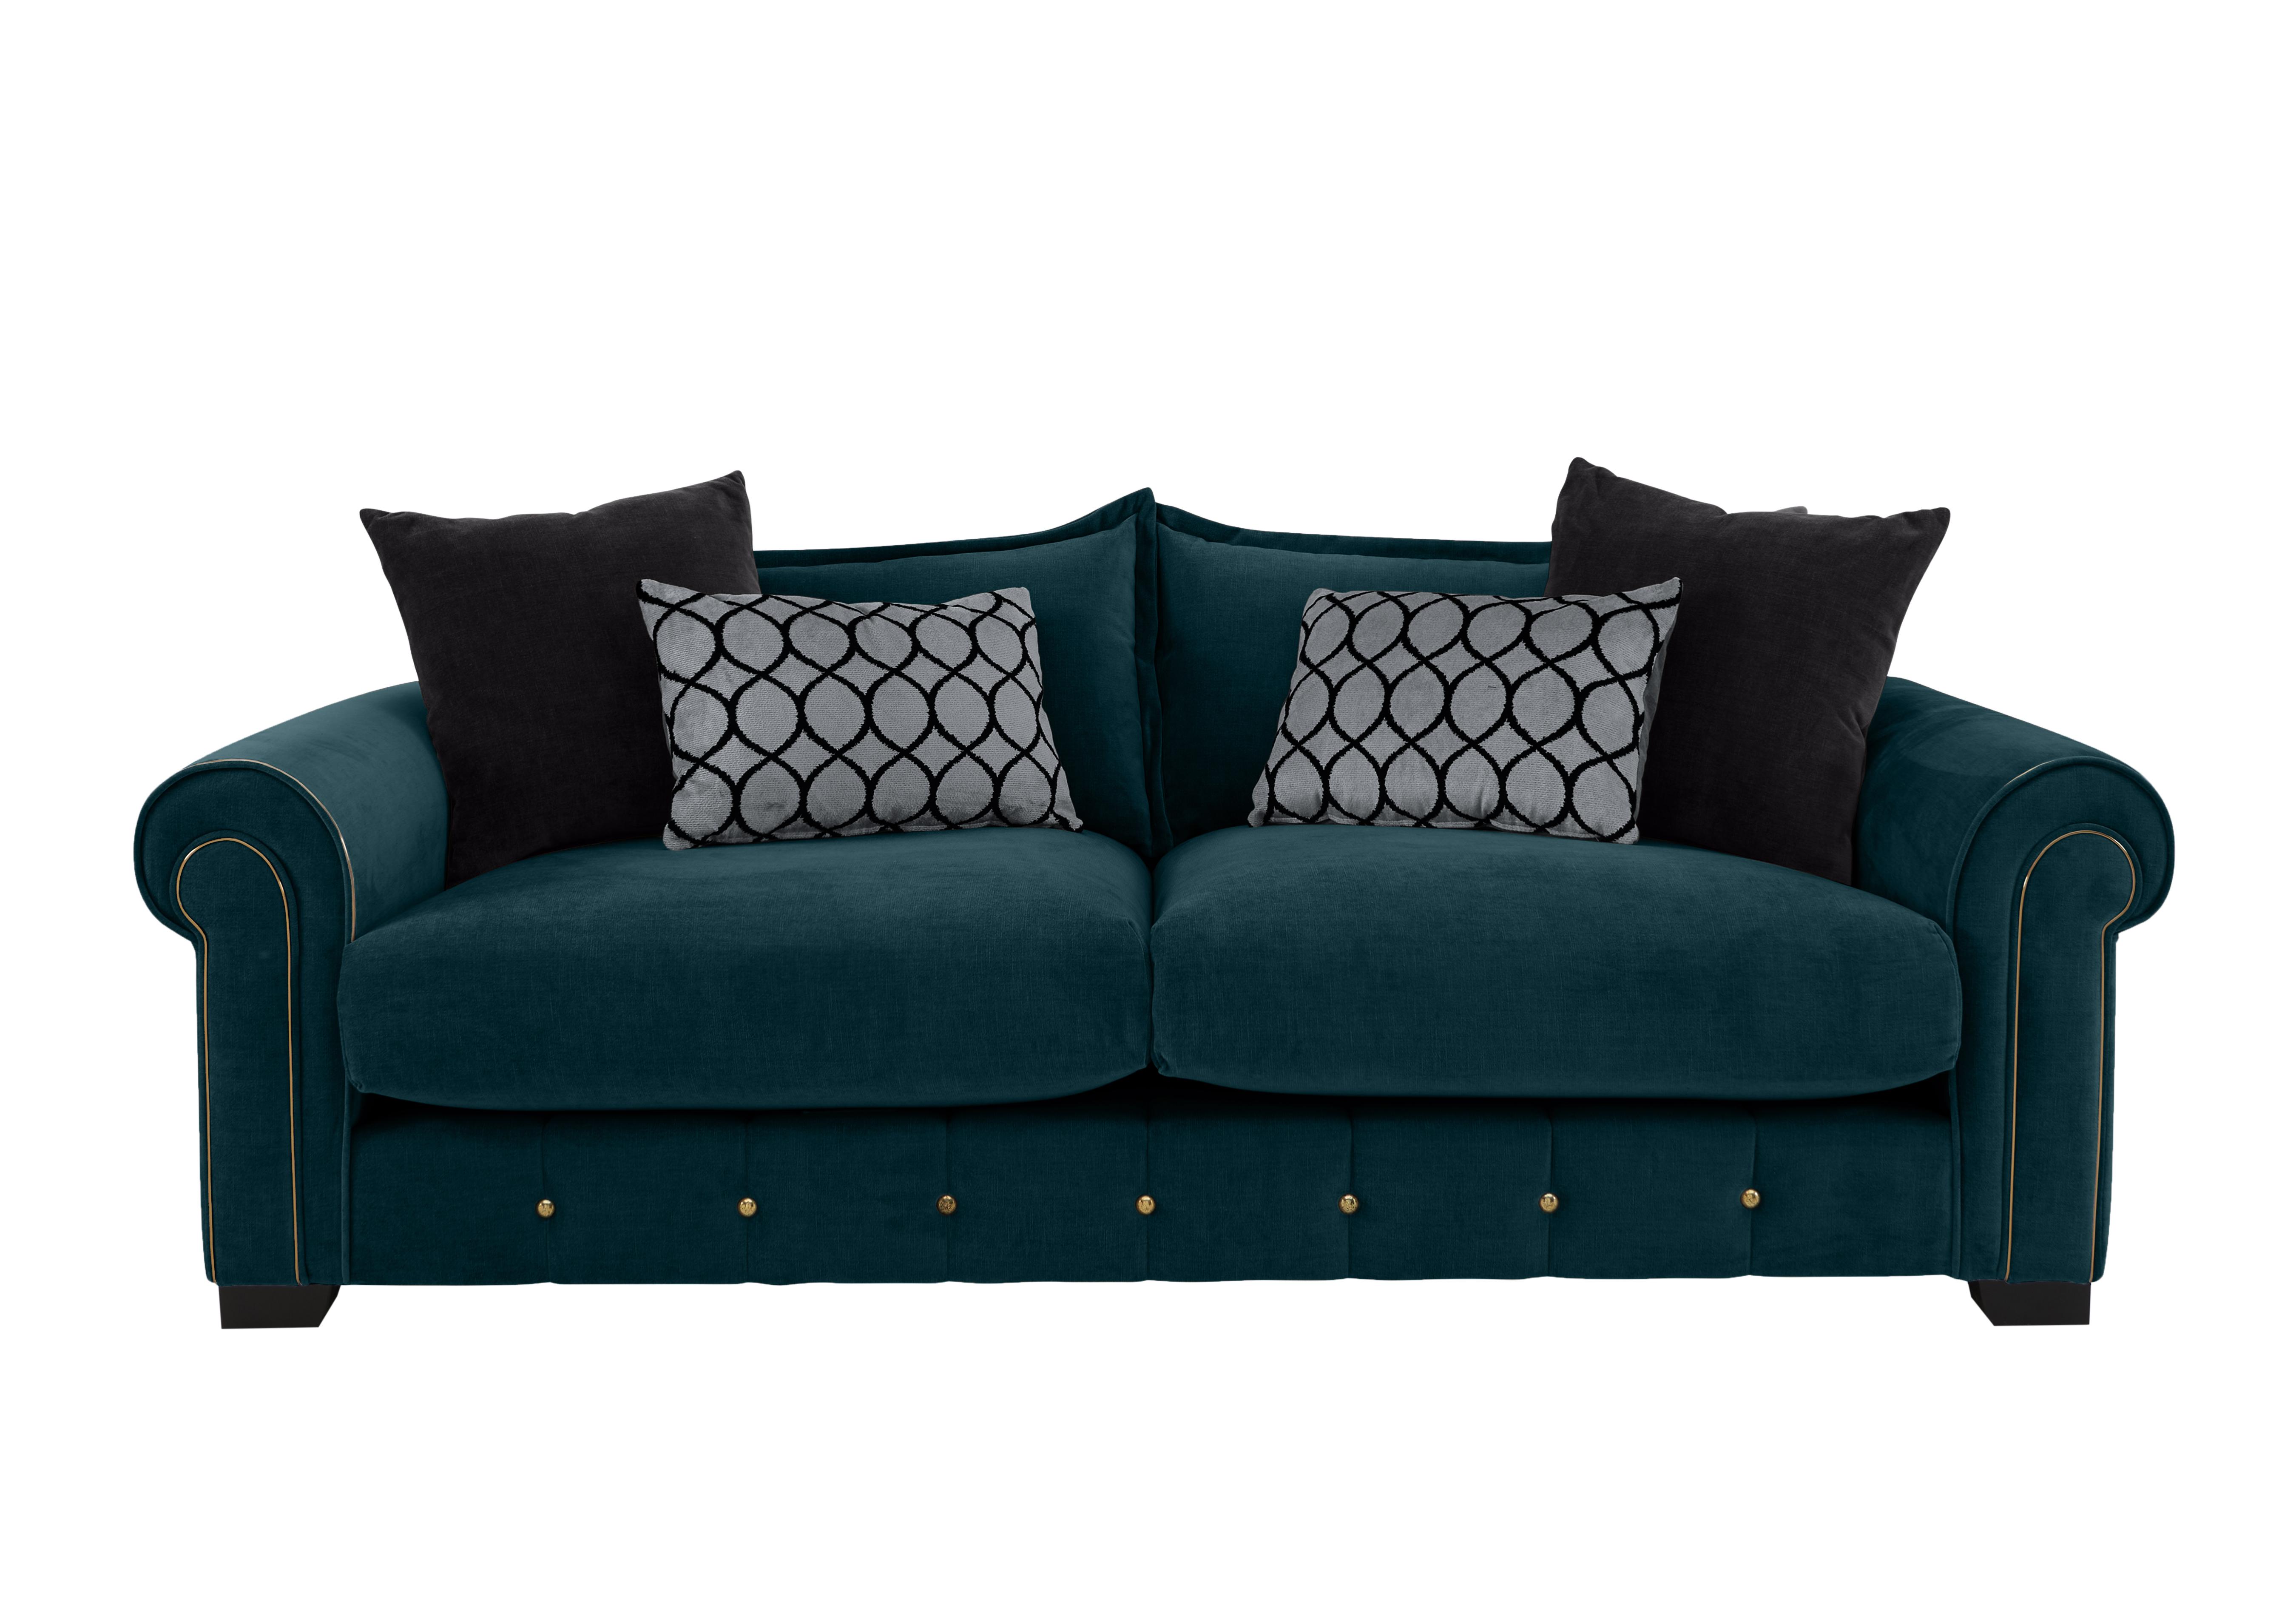 Sumptuous 4 Seater Fabric Sofa in Chamonix Teal Dk/Gold on Furniture Village